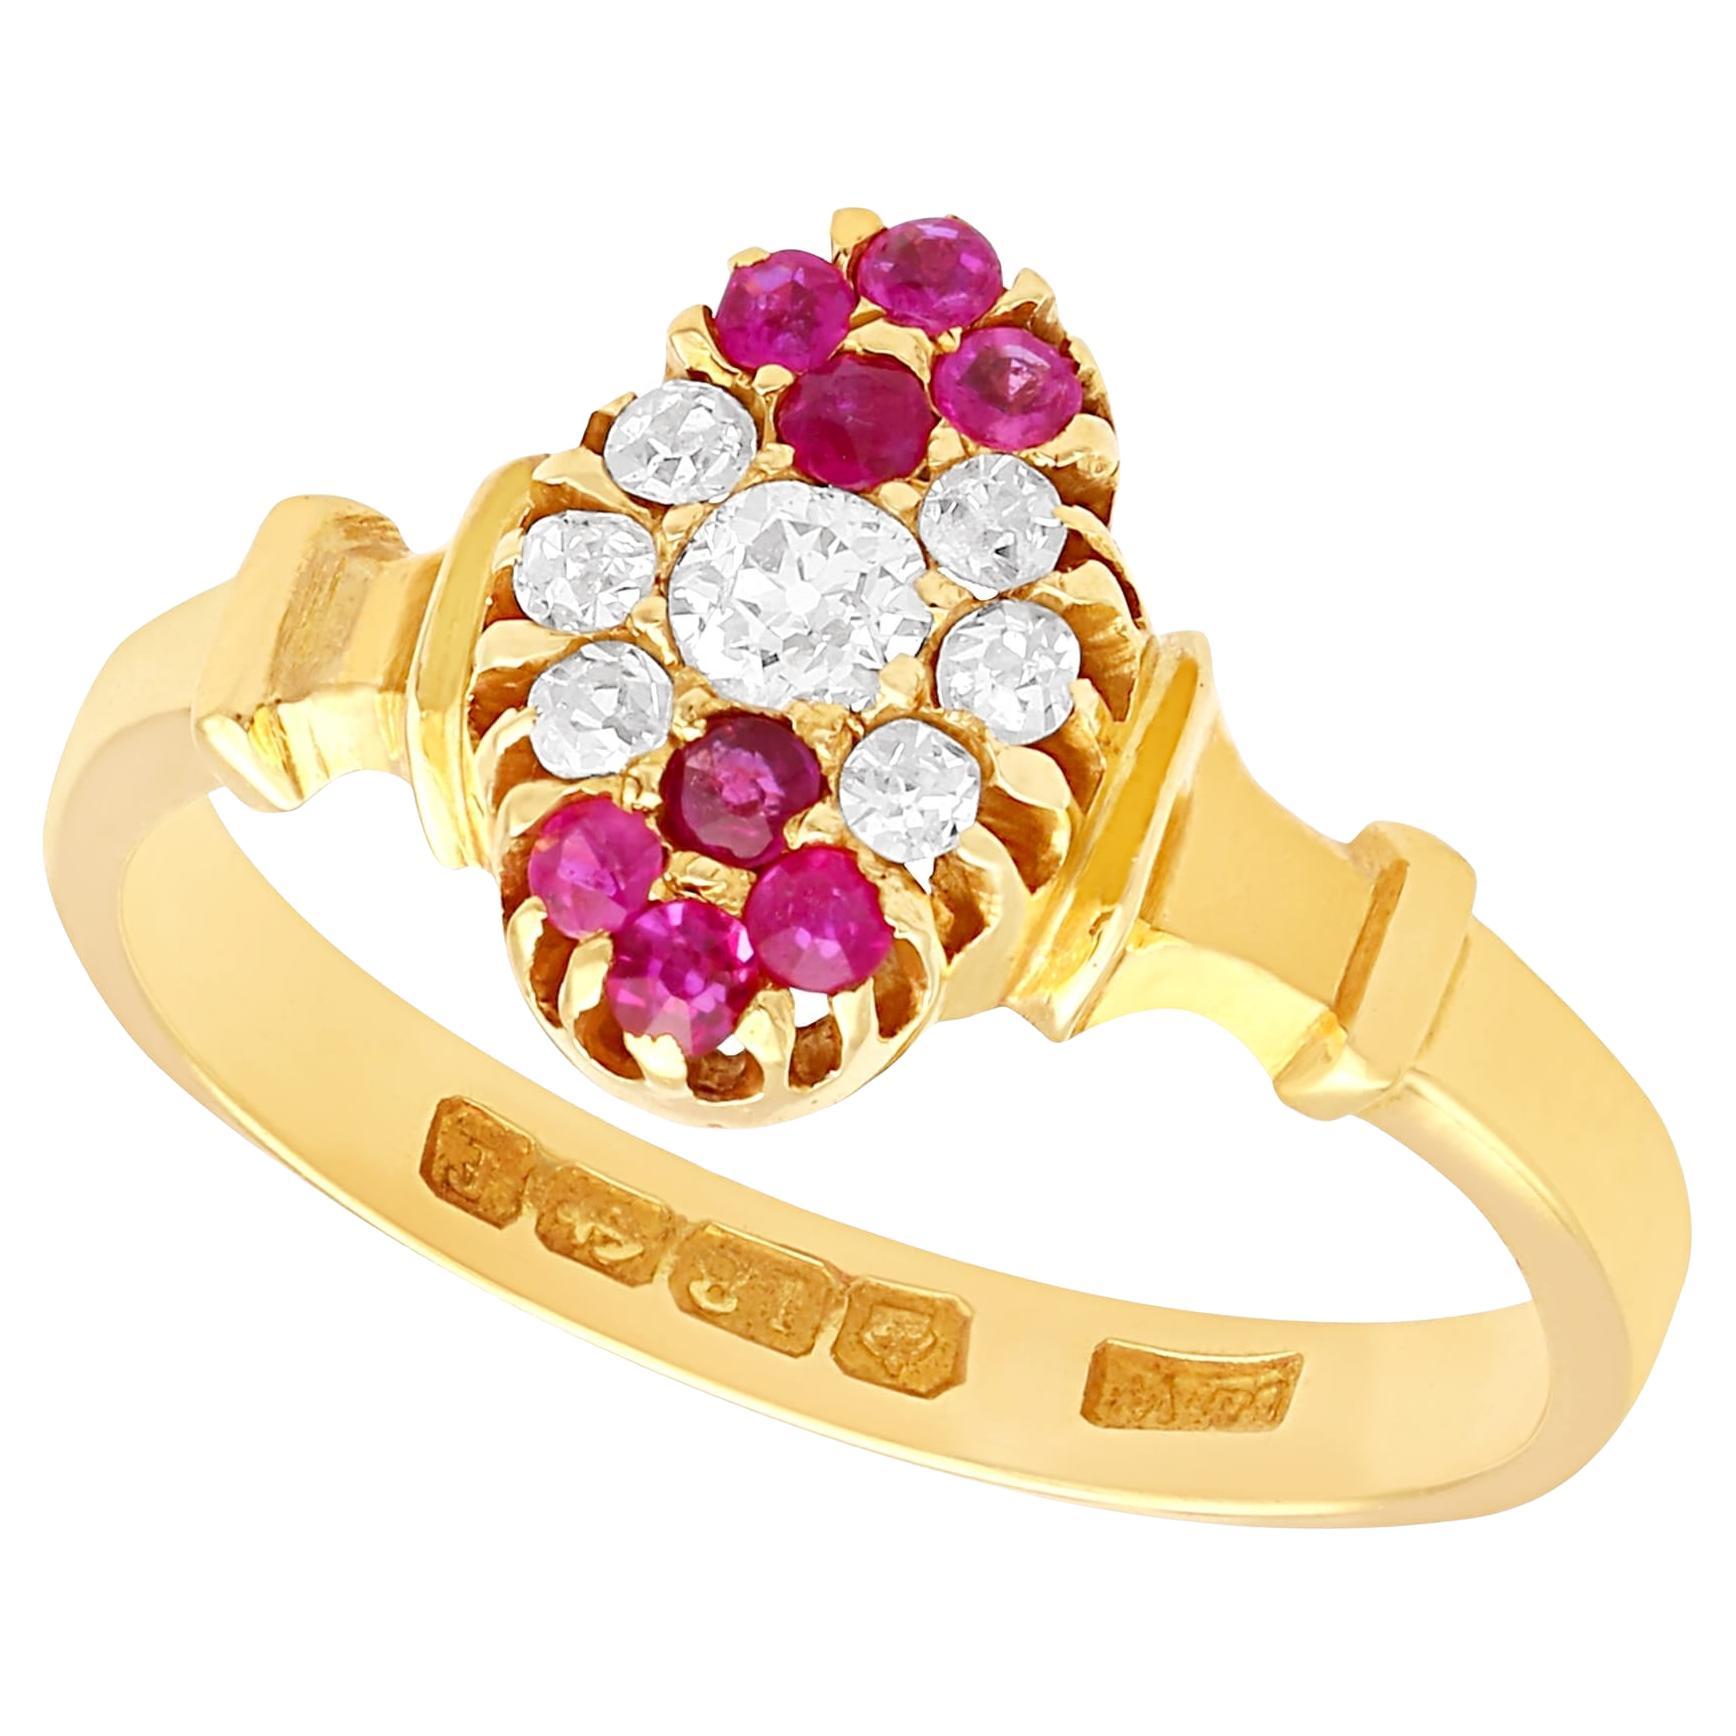 Antique Edwardian 1905 Diamond Ruby Gold Cocktail Ring